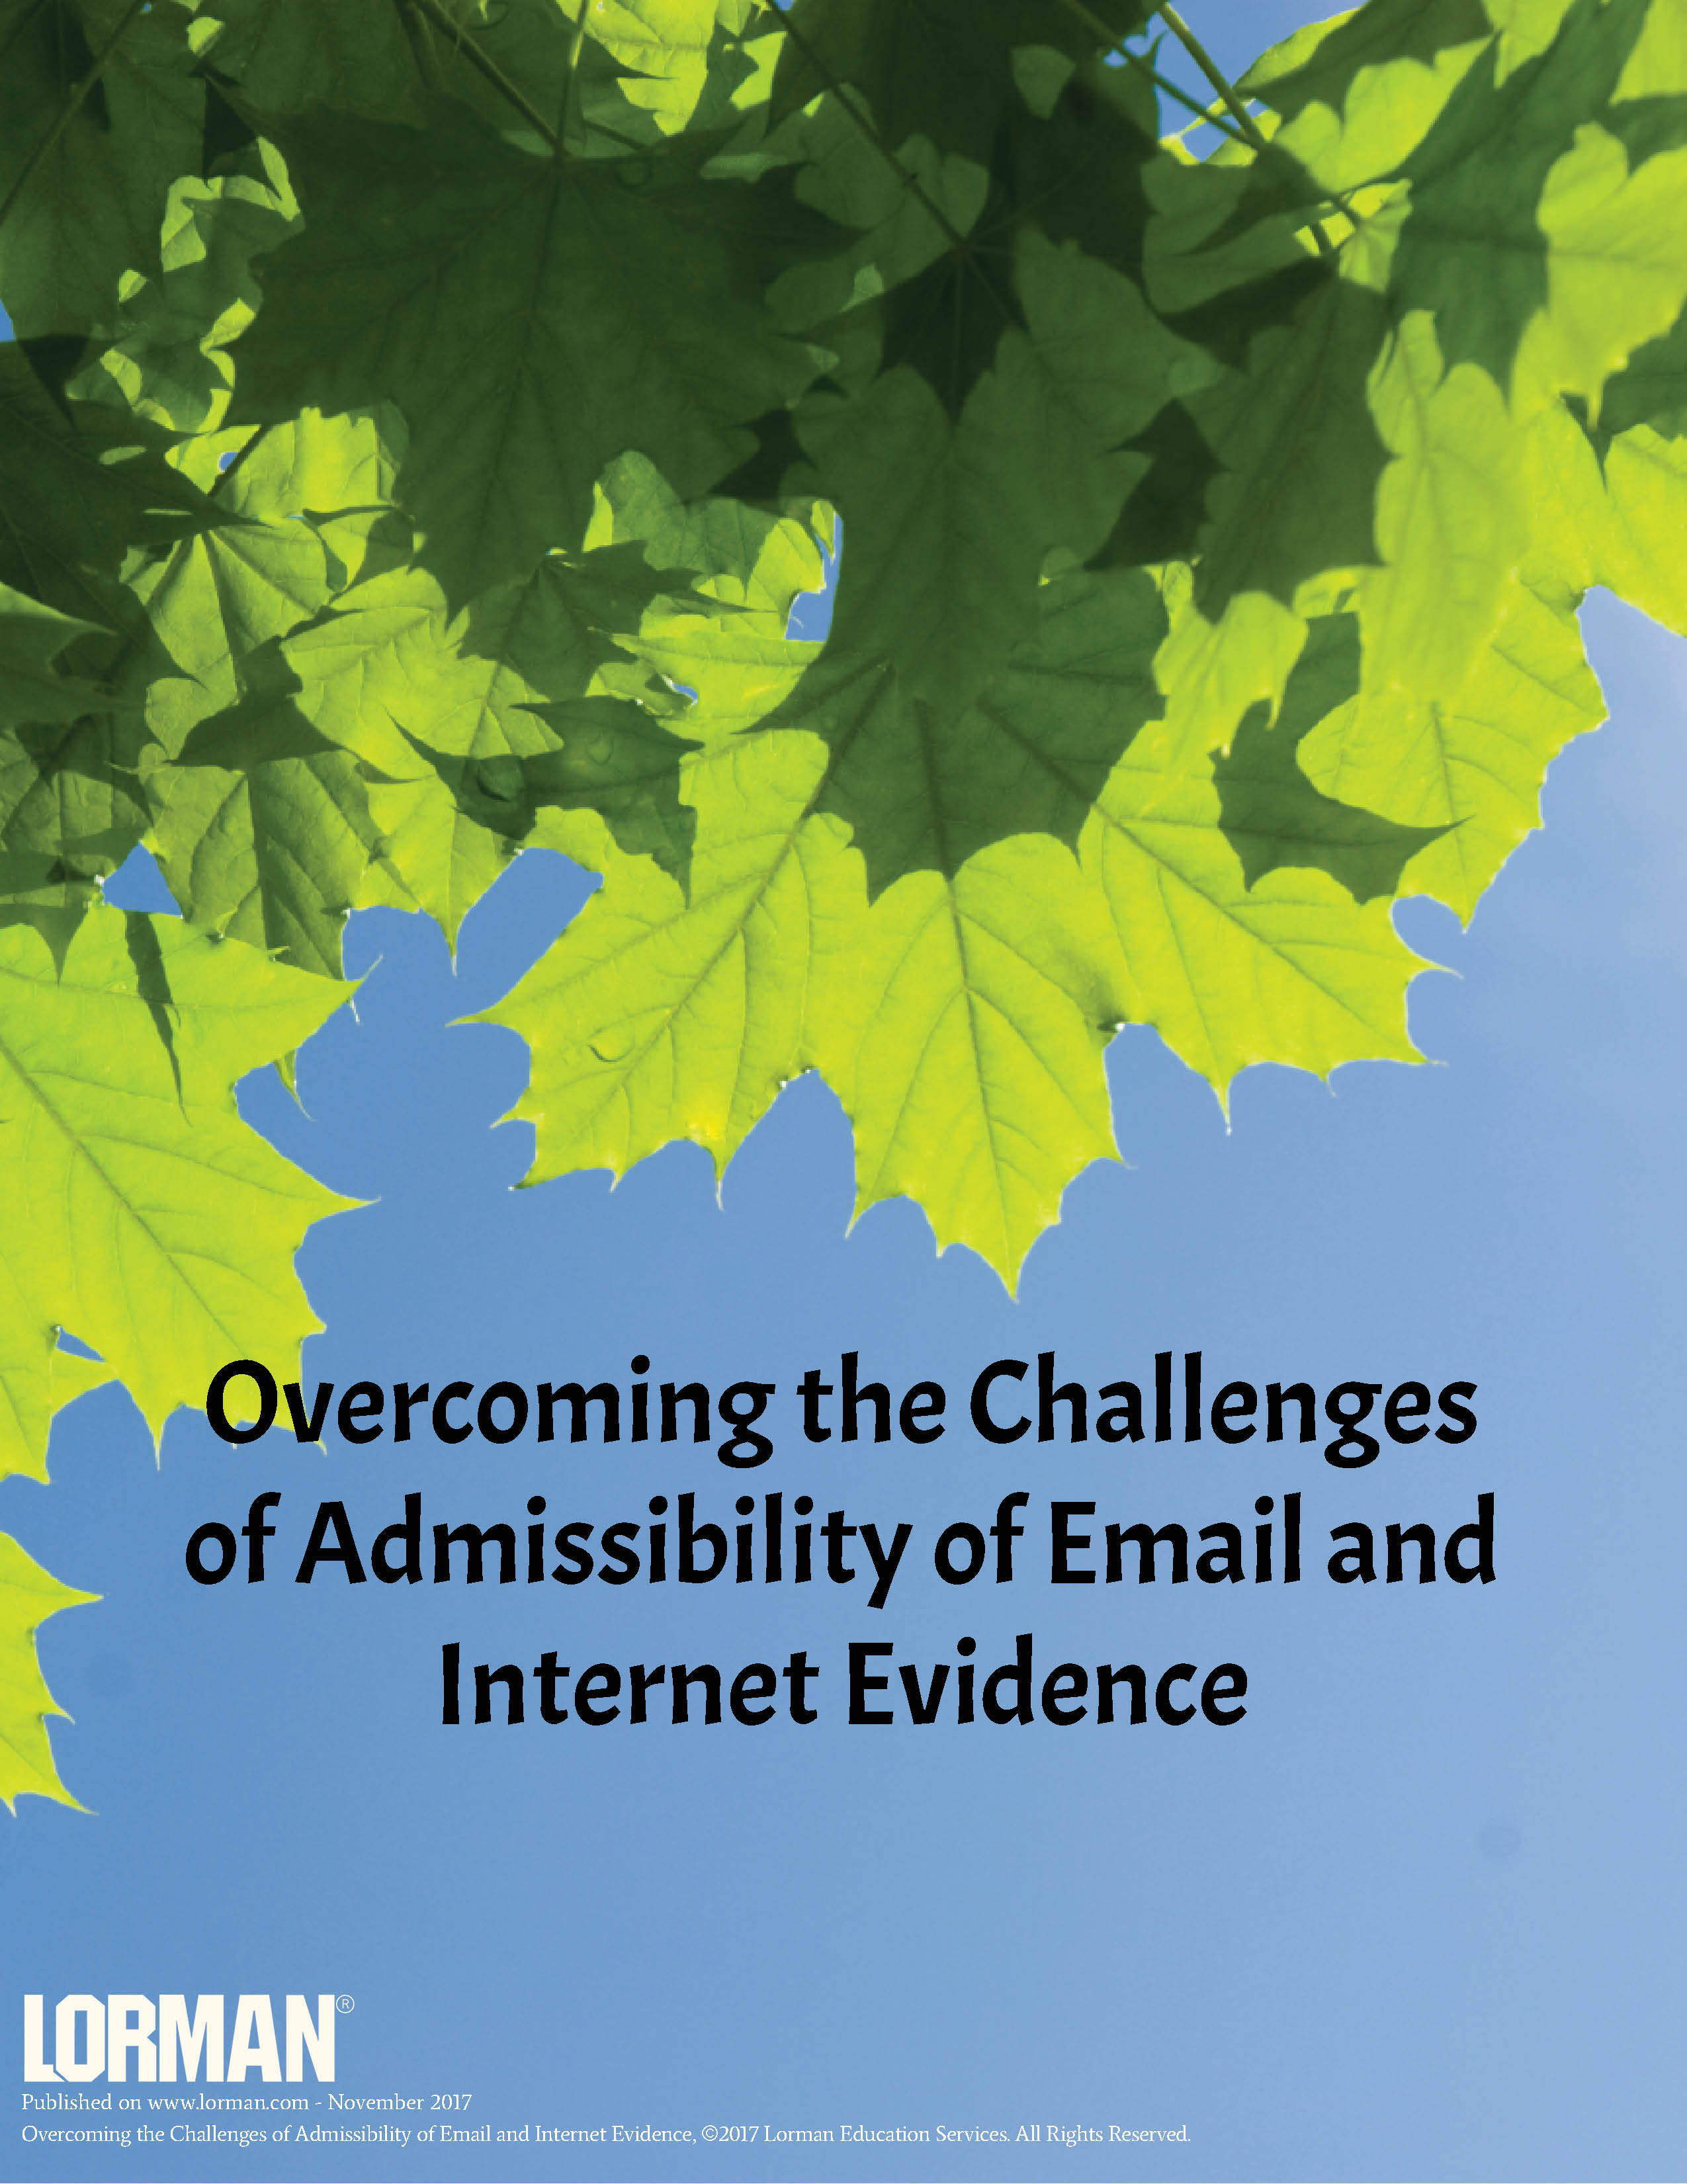 Overcoming the Challenges of Admissibility of Email and Internet Evidence